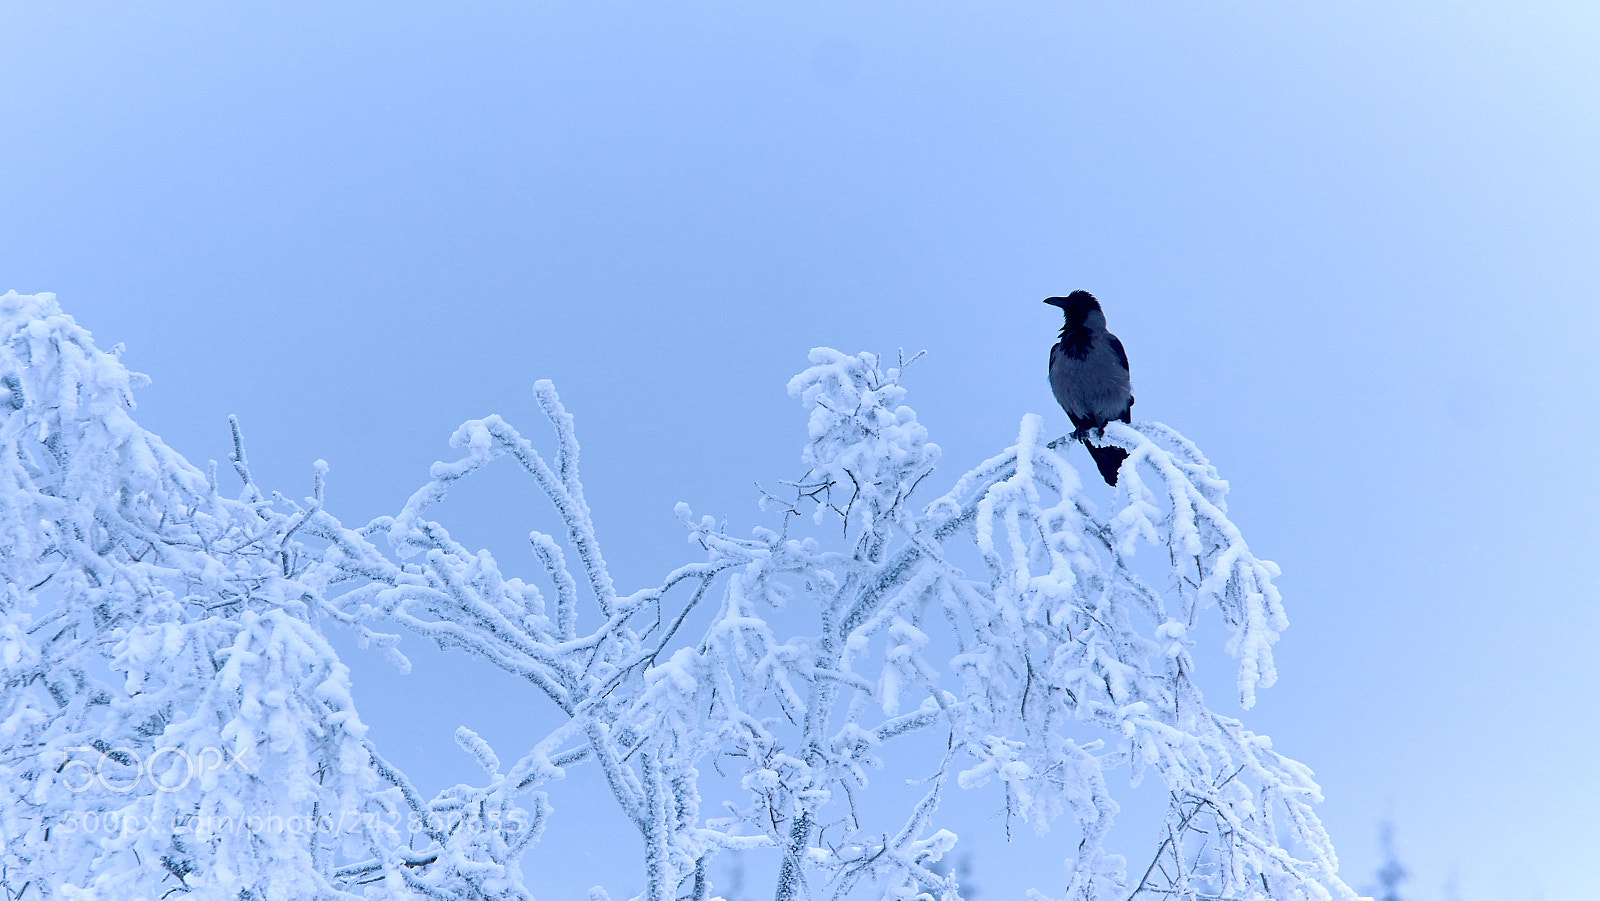 Sony ILCA-77M2 sample photo. Crow in a snowy photography